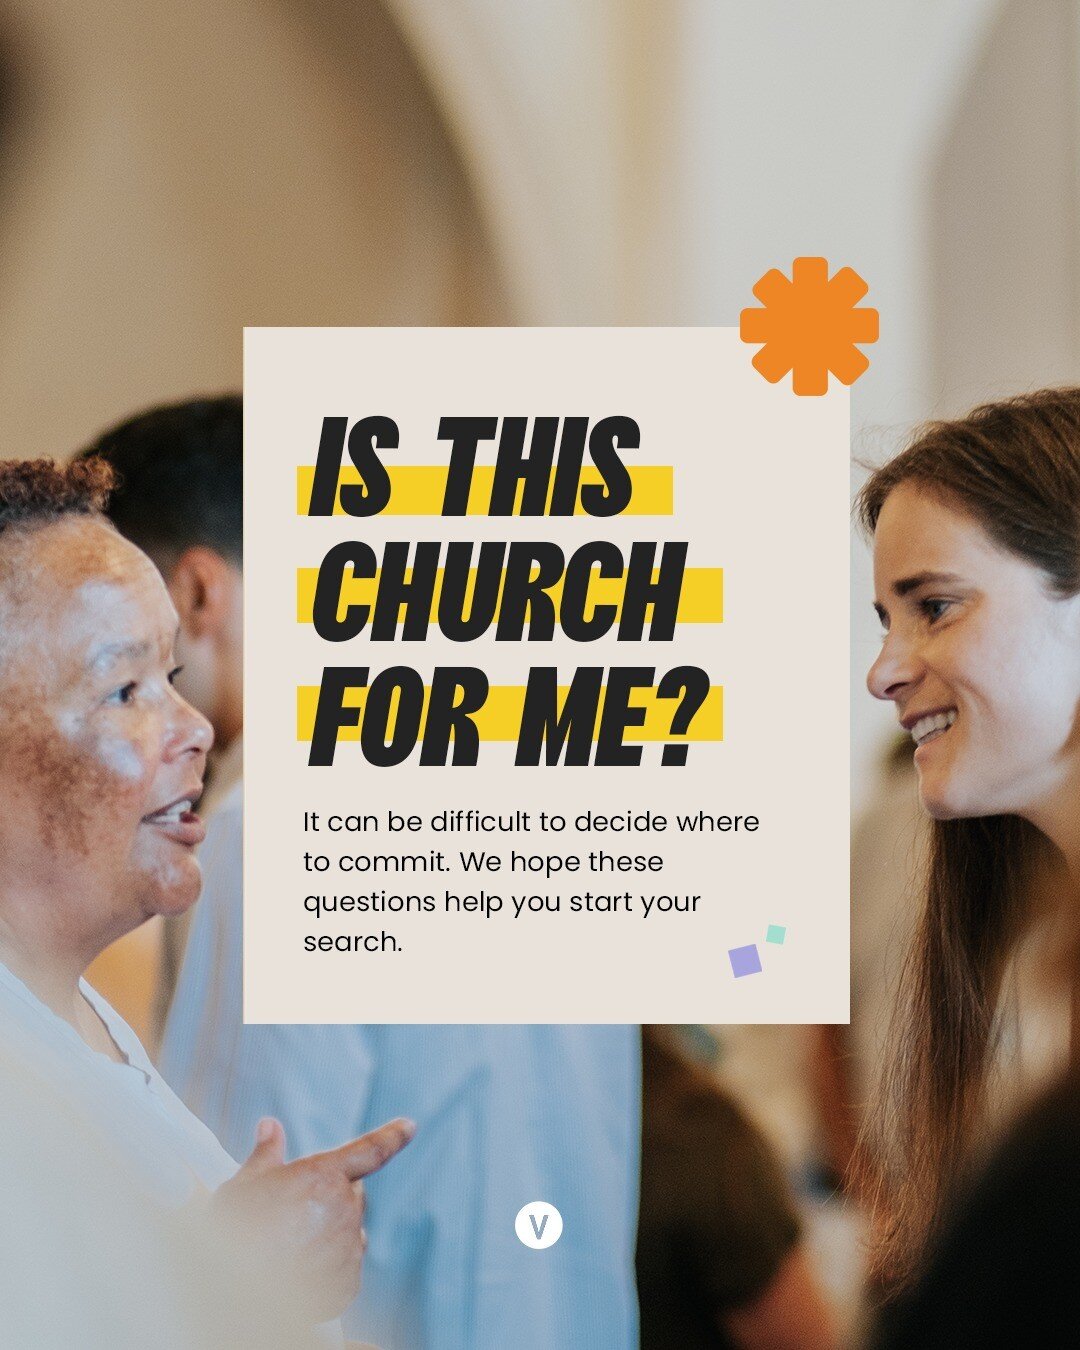 We are passionate about helping you find a church to call home to - even if it's not here at Vintage. It can be difficult to decide on where to commit, so here are some helpful questions to consider when deciding if a church is for you.

What are som